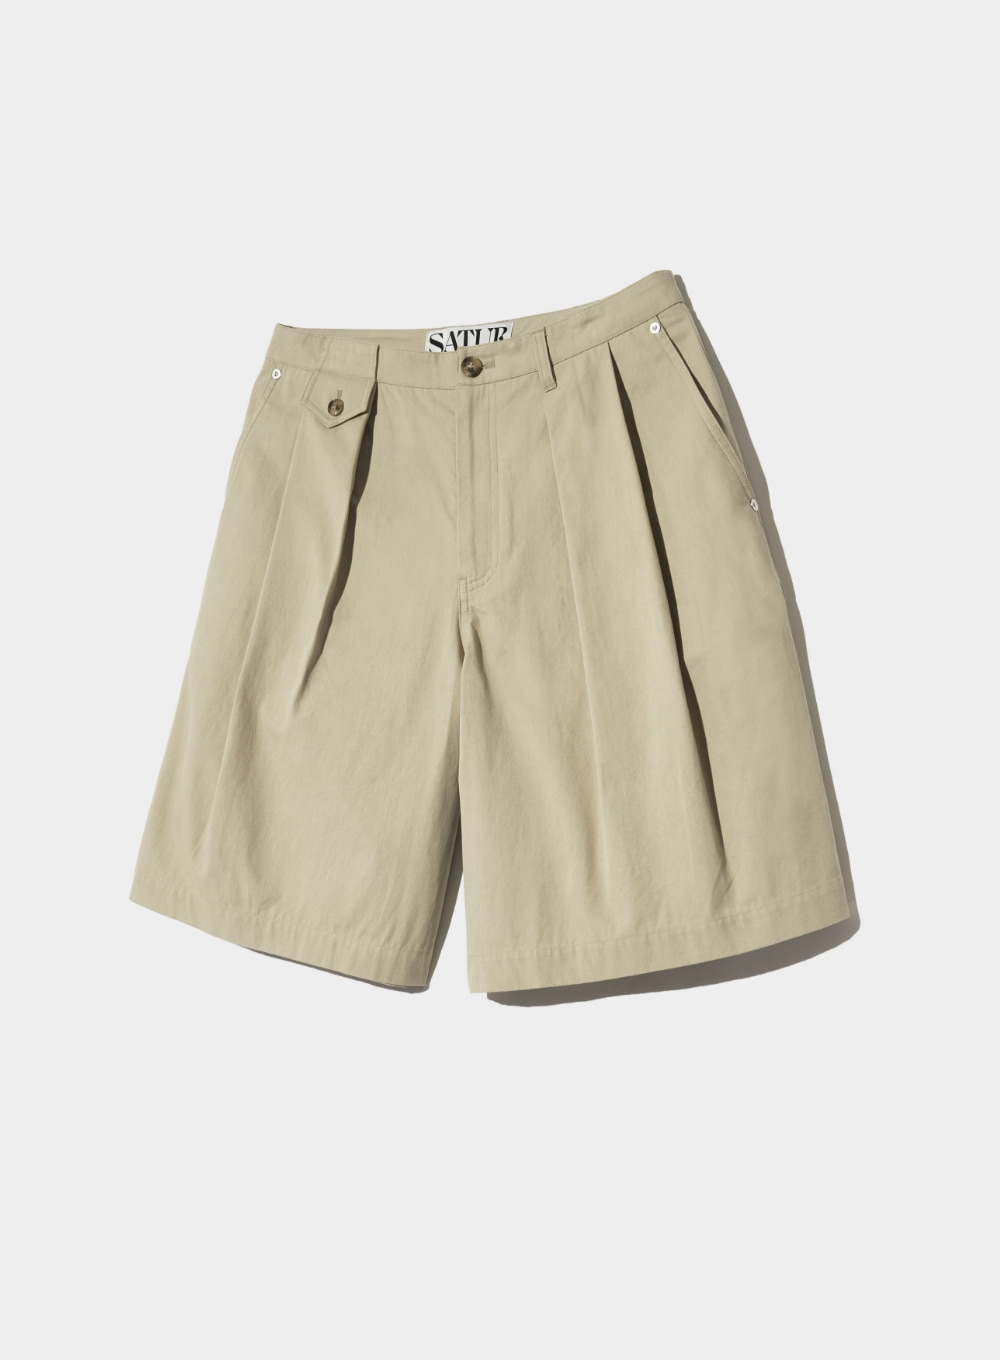 Bled Cotton Chino Half Pants - Sand Beige